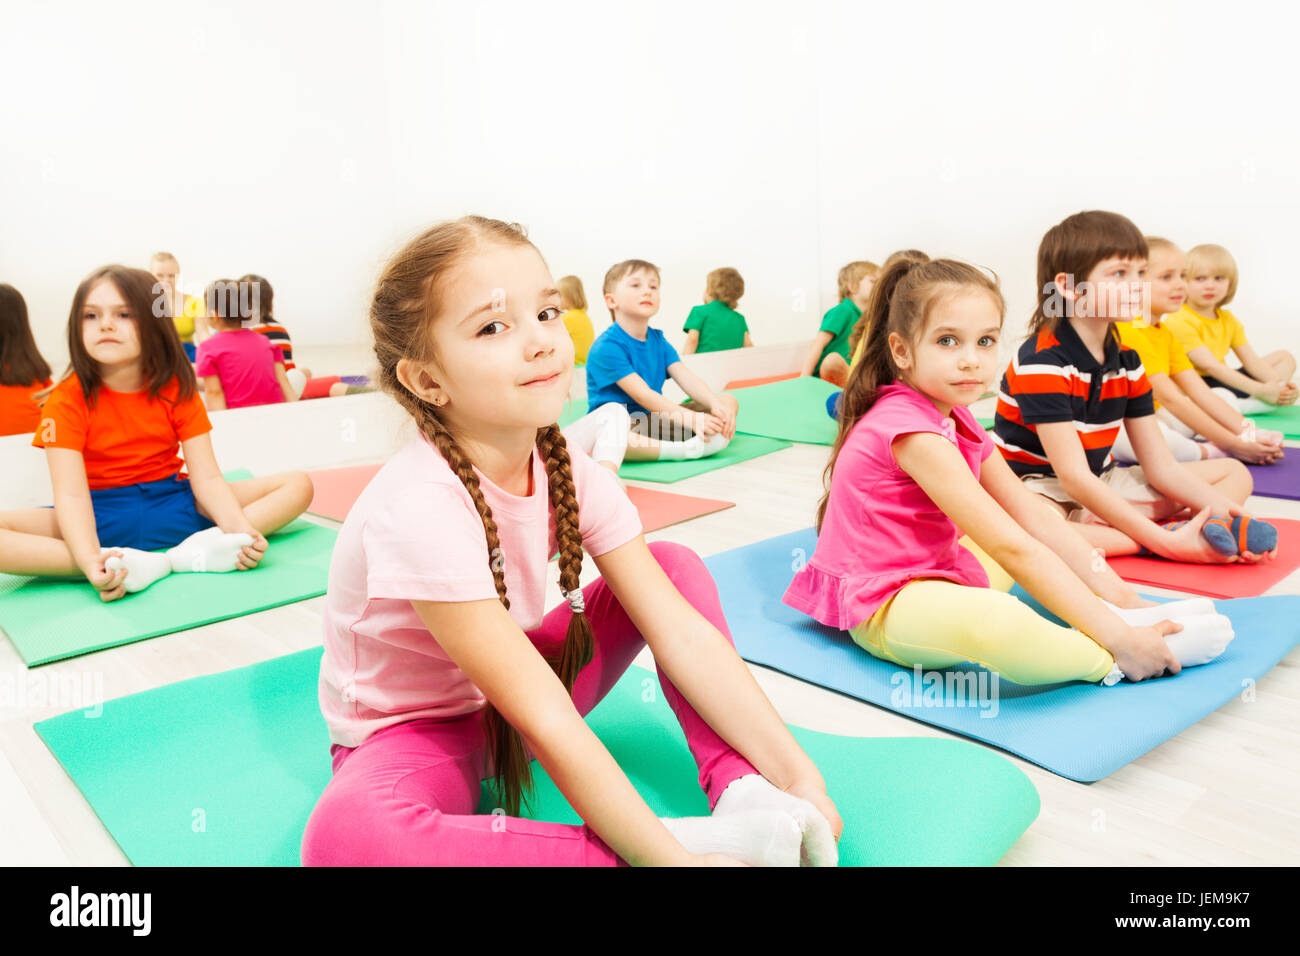 Girl doing butterfly stretch in gymnastic group Stock Photo